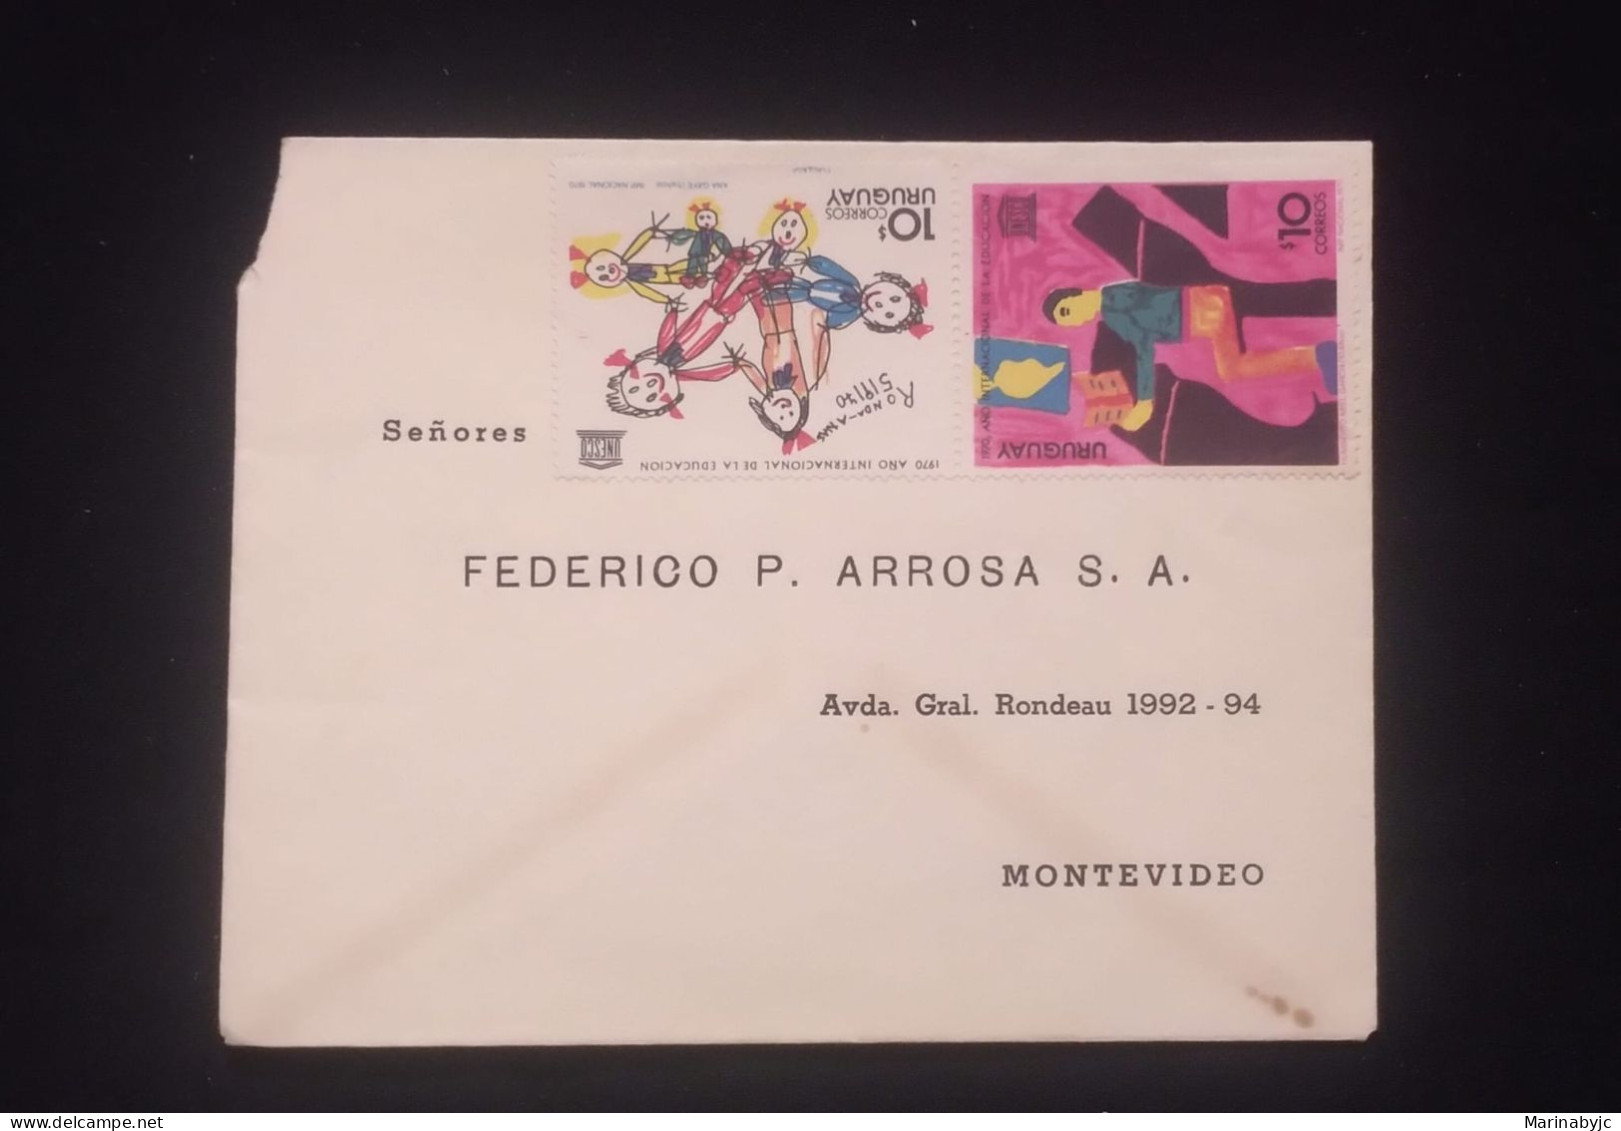 C) 1970 URUGUAY, INTERNAL MAIL WITH DOUBLE STAMP XF - Uruguay